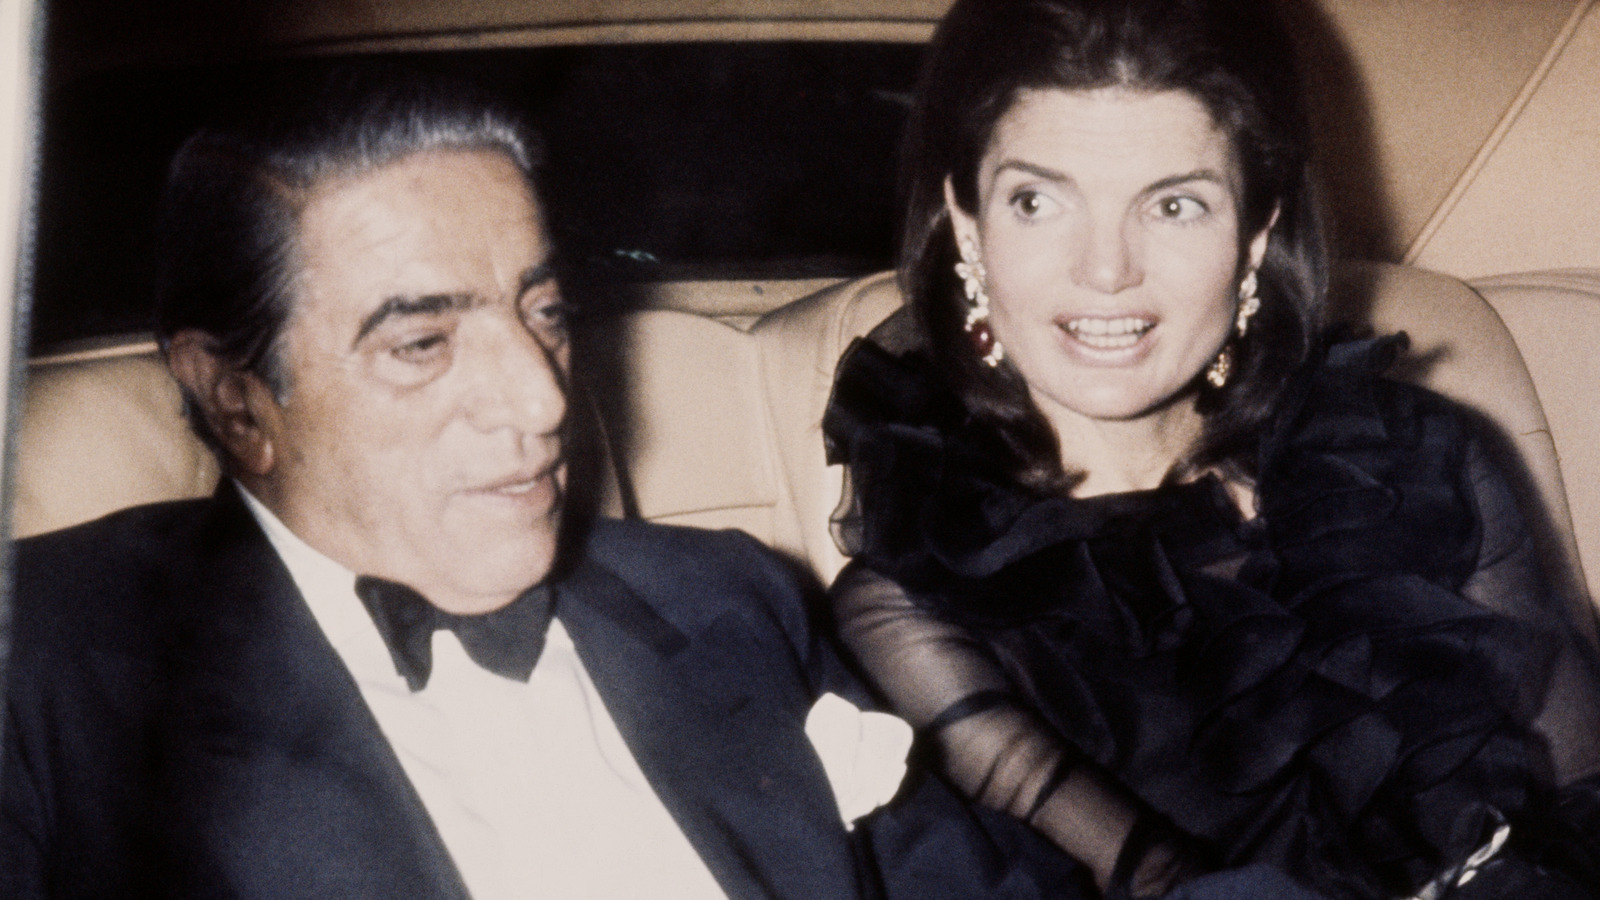 Everything We Know About Aristotle Onassis, Jackie Kennedy's Second Husband